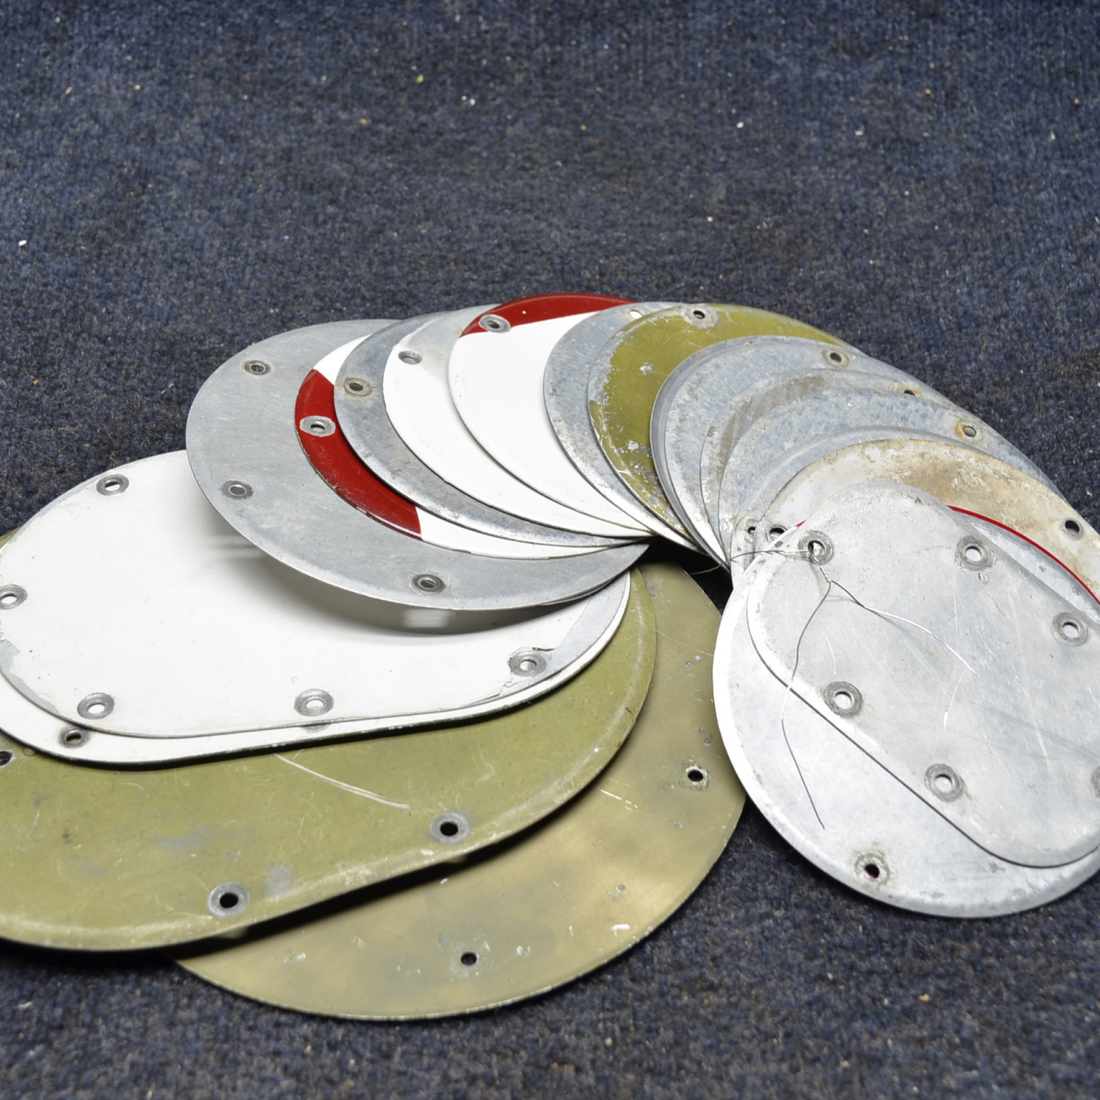 Used aircraft parts for sale, Lot of Cover plates Piper  [part_model] Cessna PA28, 182, 172 LOT OF COVER PLATES. DIFFERENT PLANES MECHANIC SPECIAL